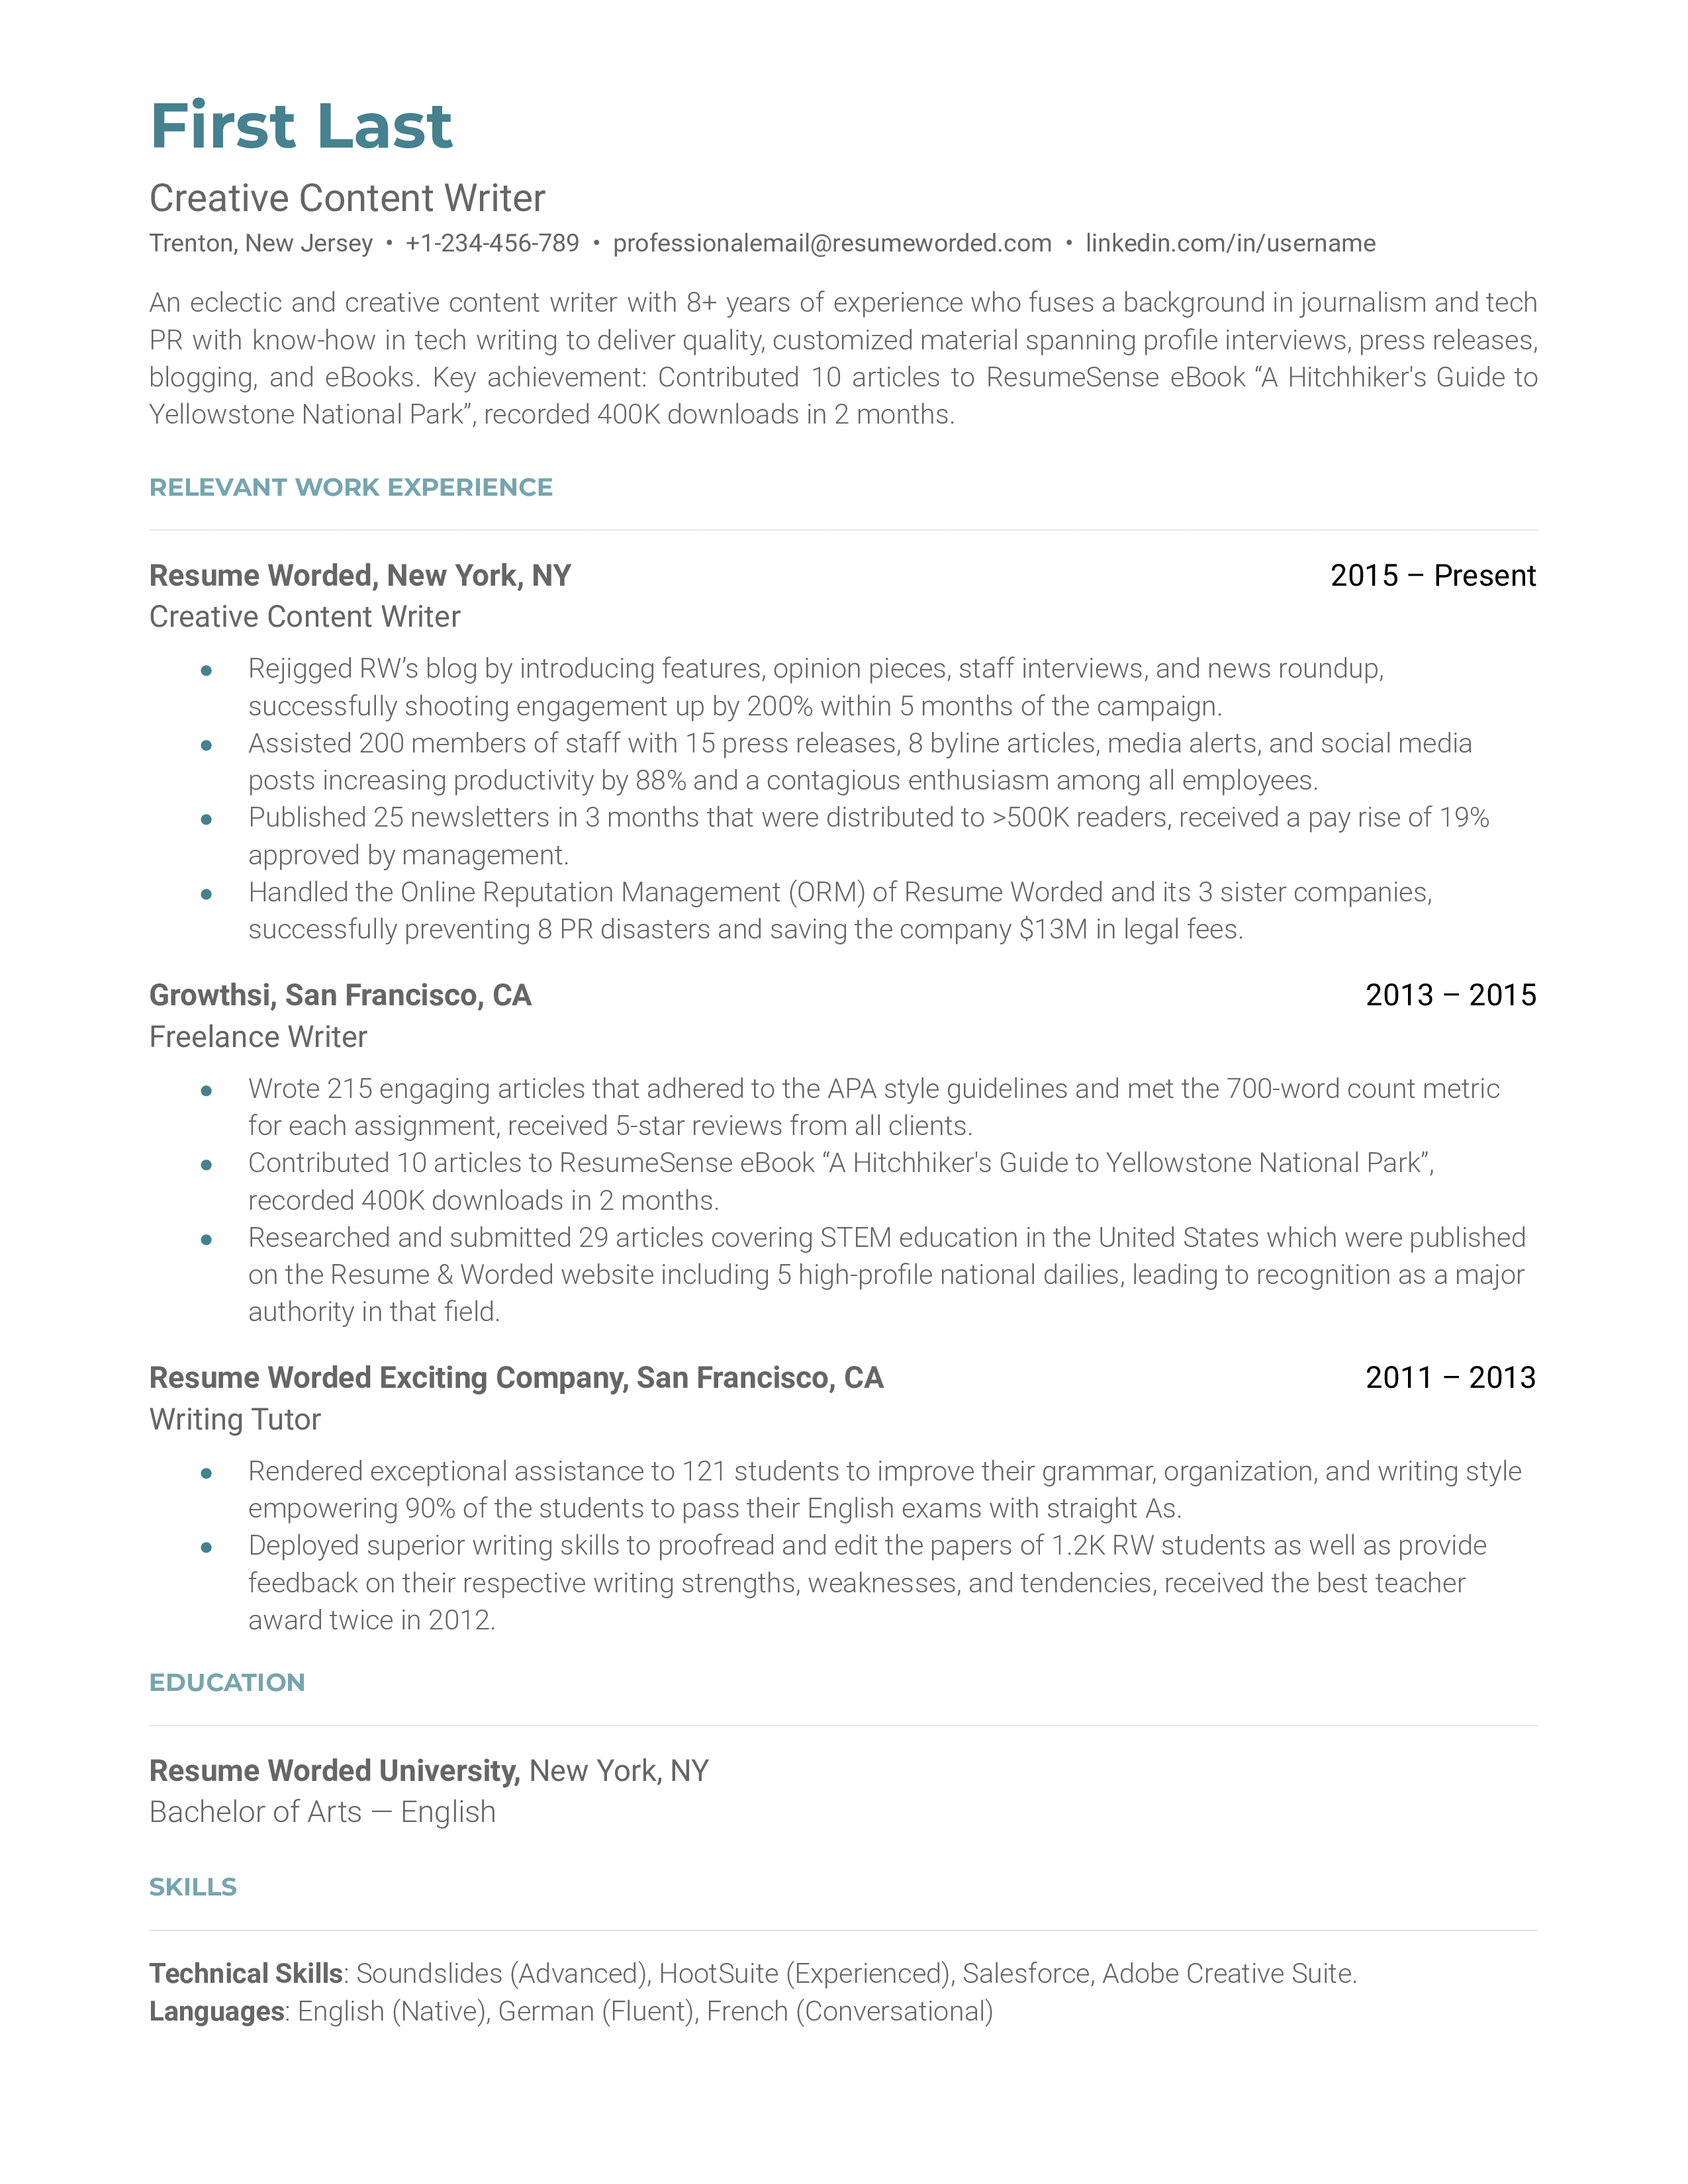 A creative content writer resume sample that highlights the applicant’s quantifiable success and language acumen